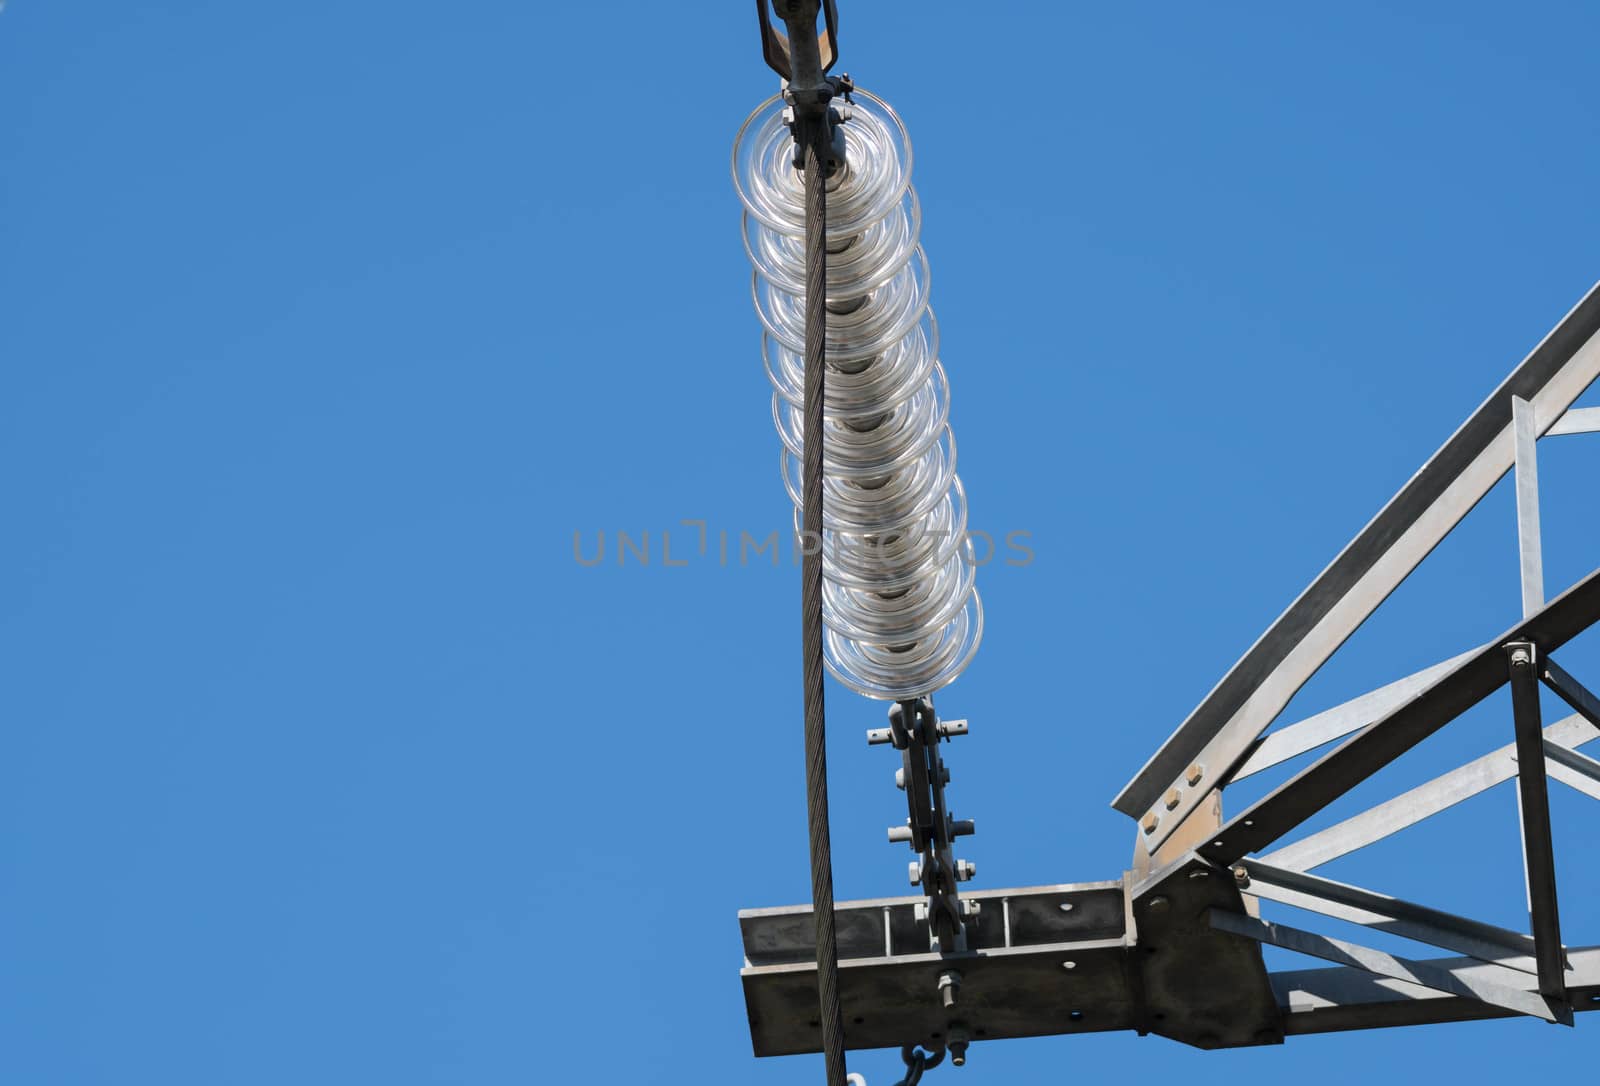 An insulator on an electricity pylon on the national grid